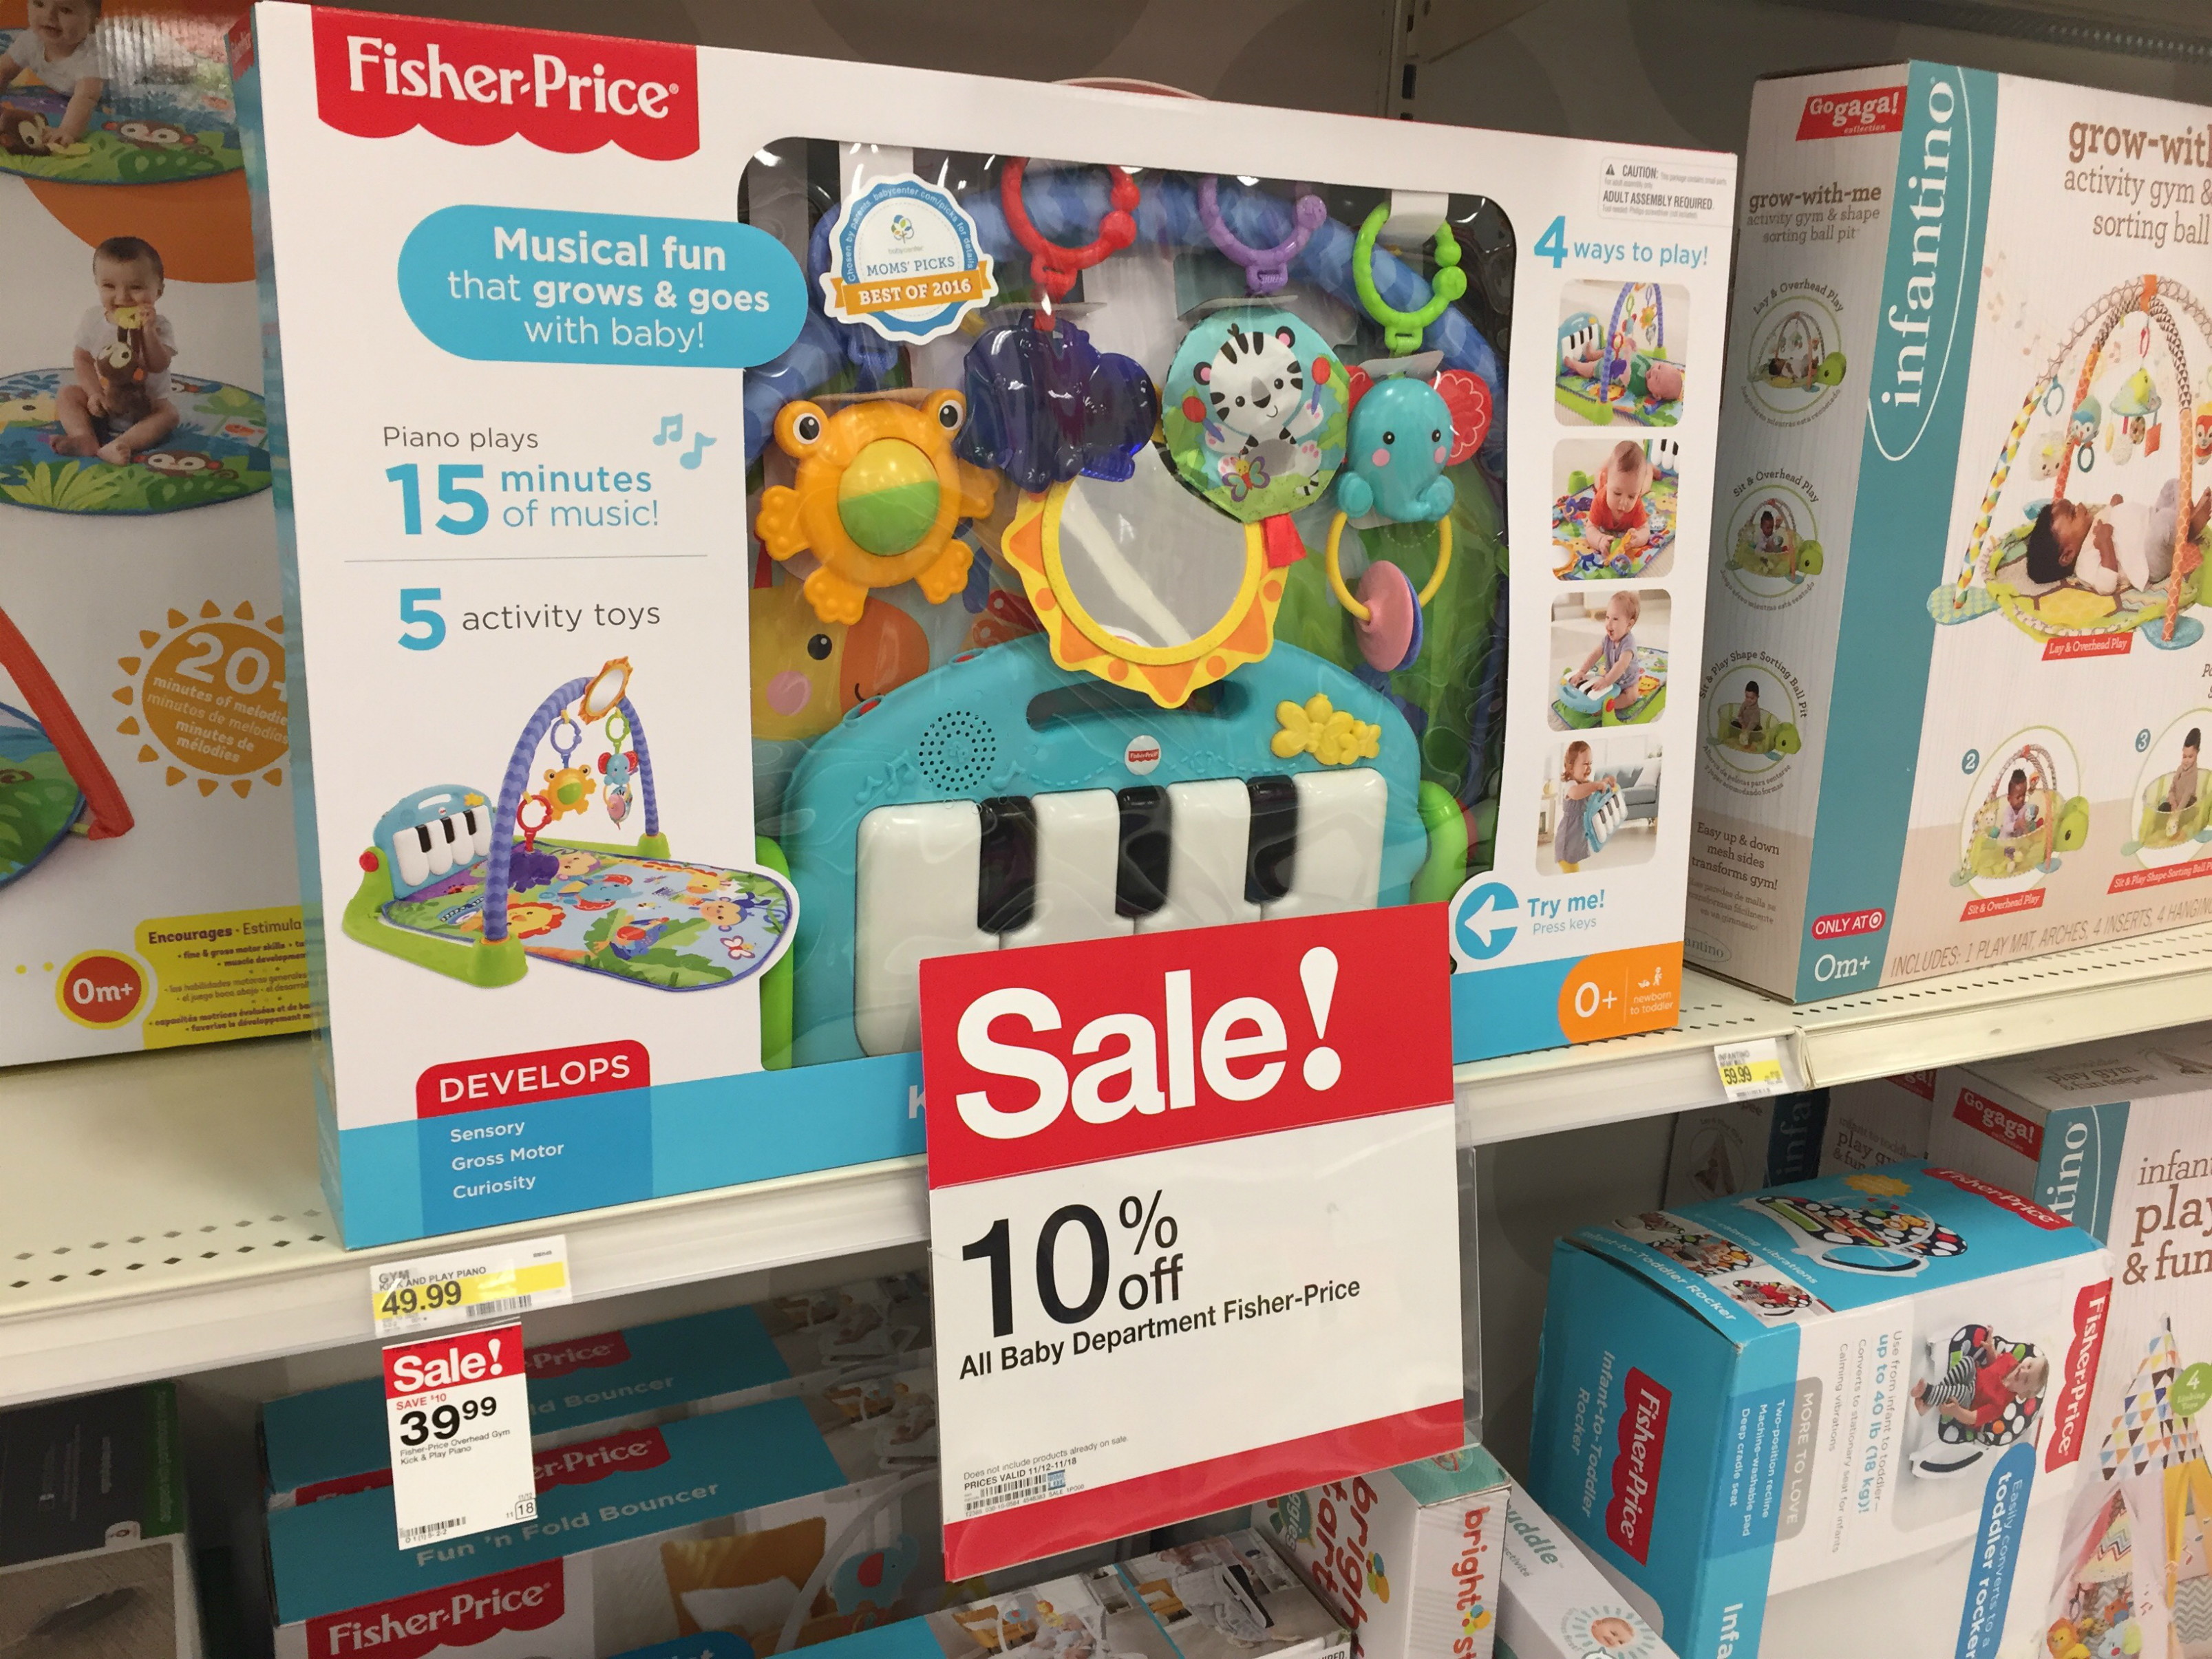 Fisher Price Kick Play Piano Gym Only 18 99 At Target The